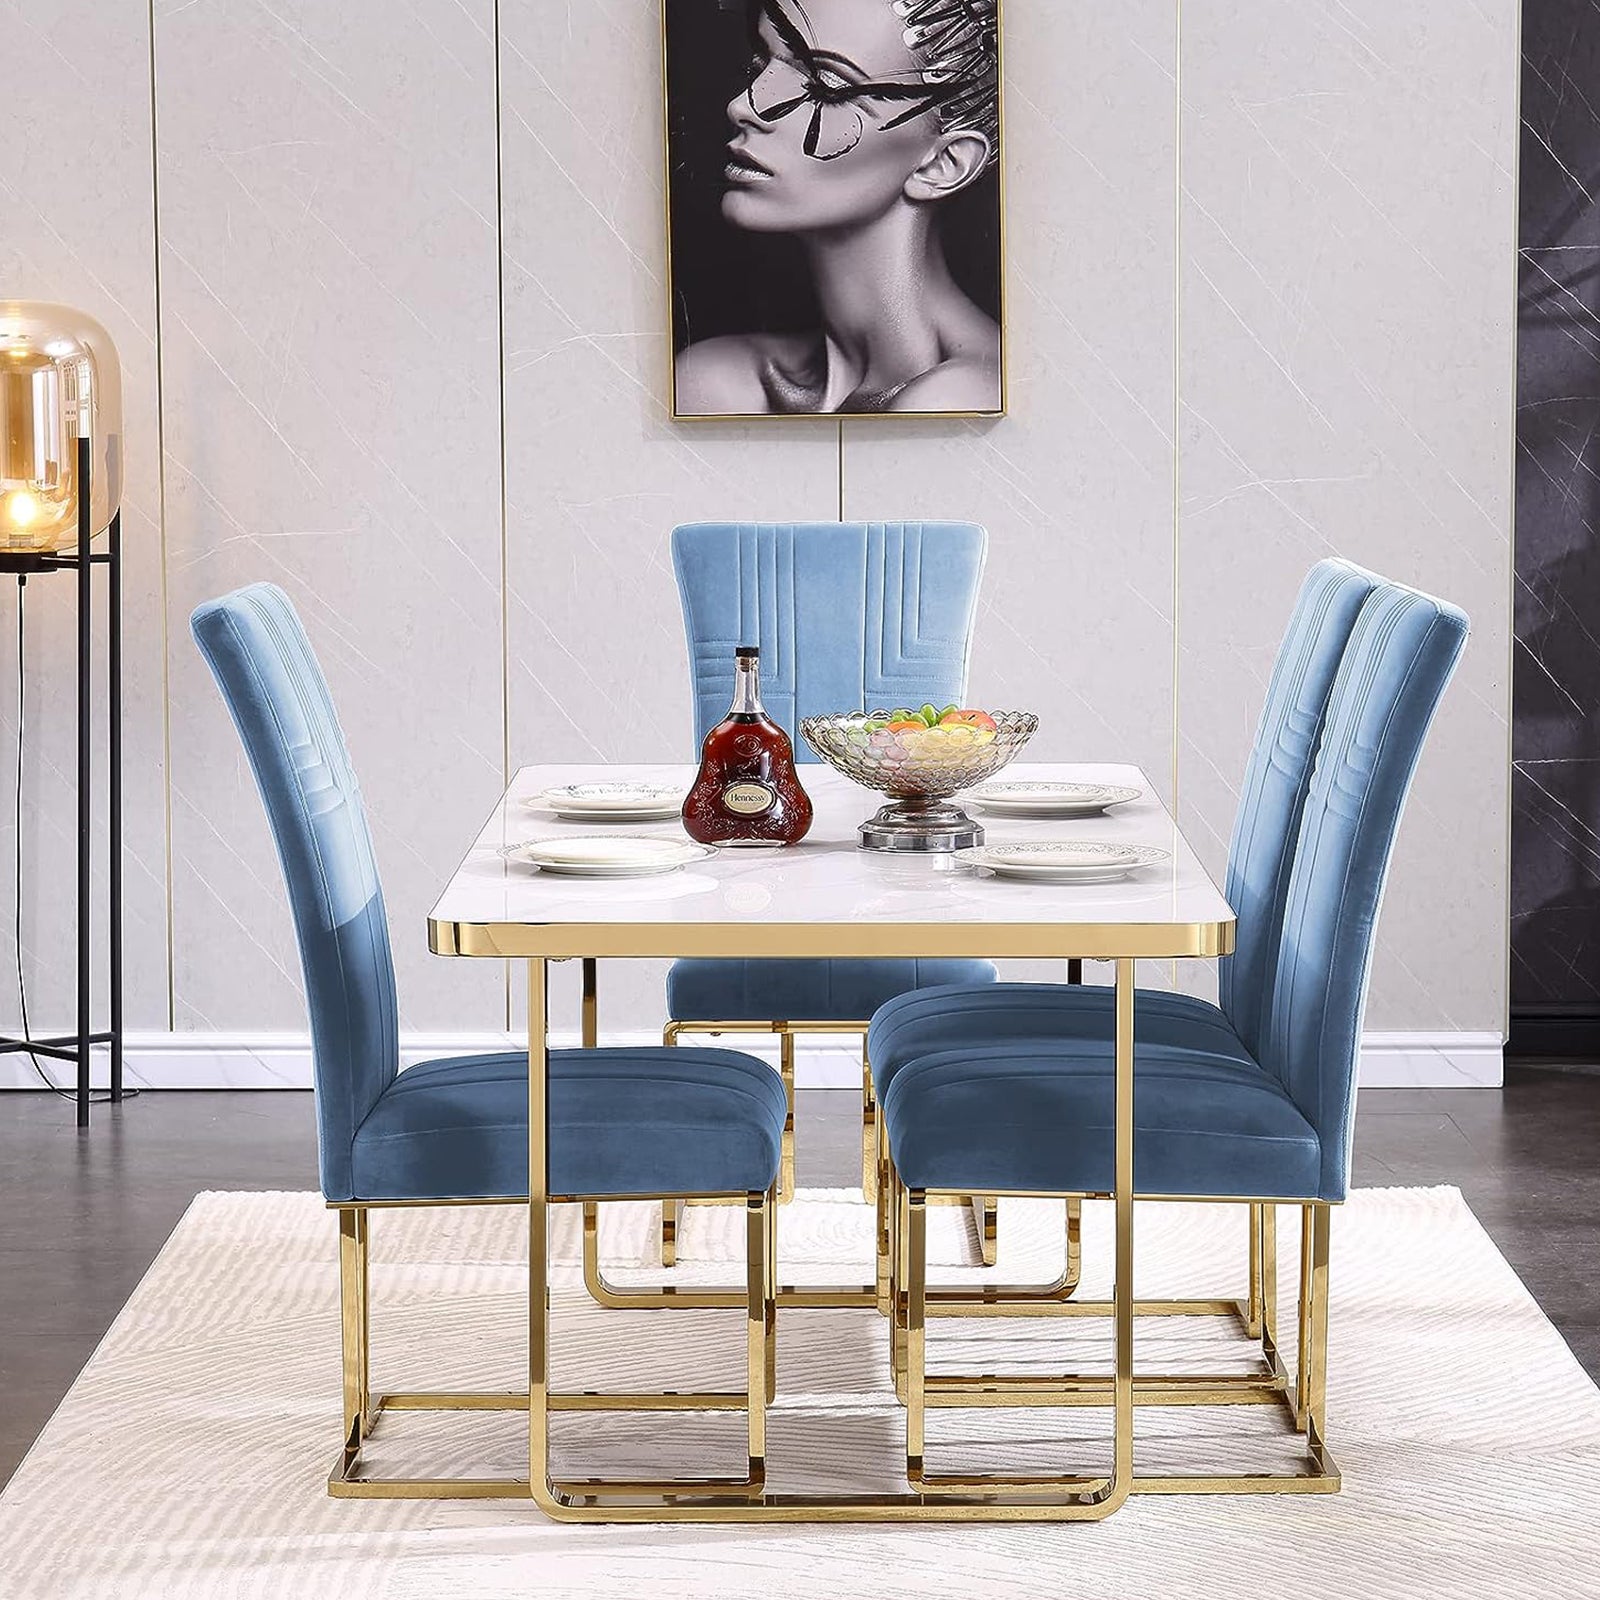 711 Set | AUZ Blue and Gold Dining room Sets for 6